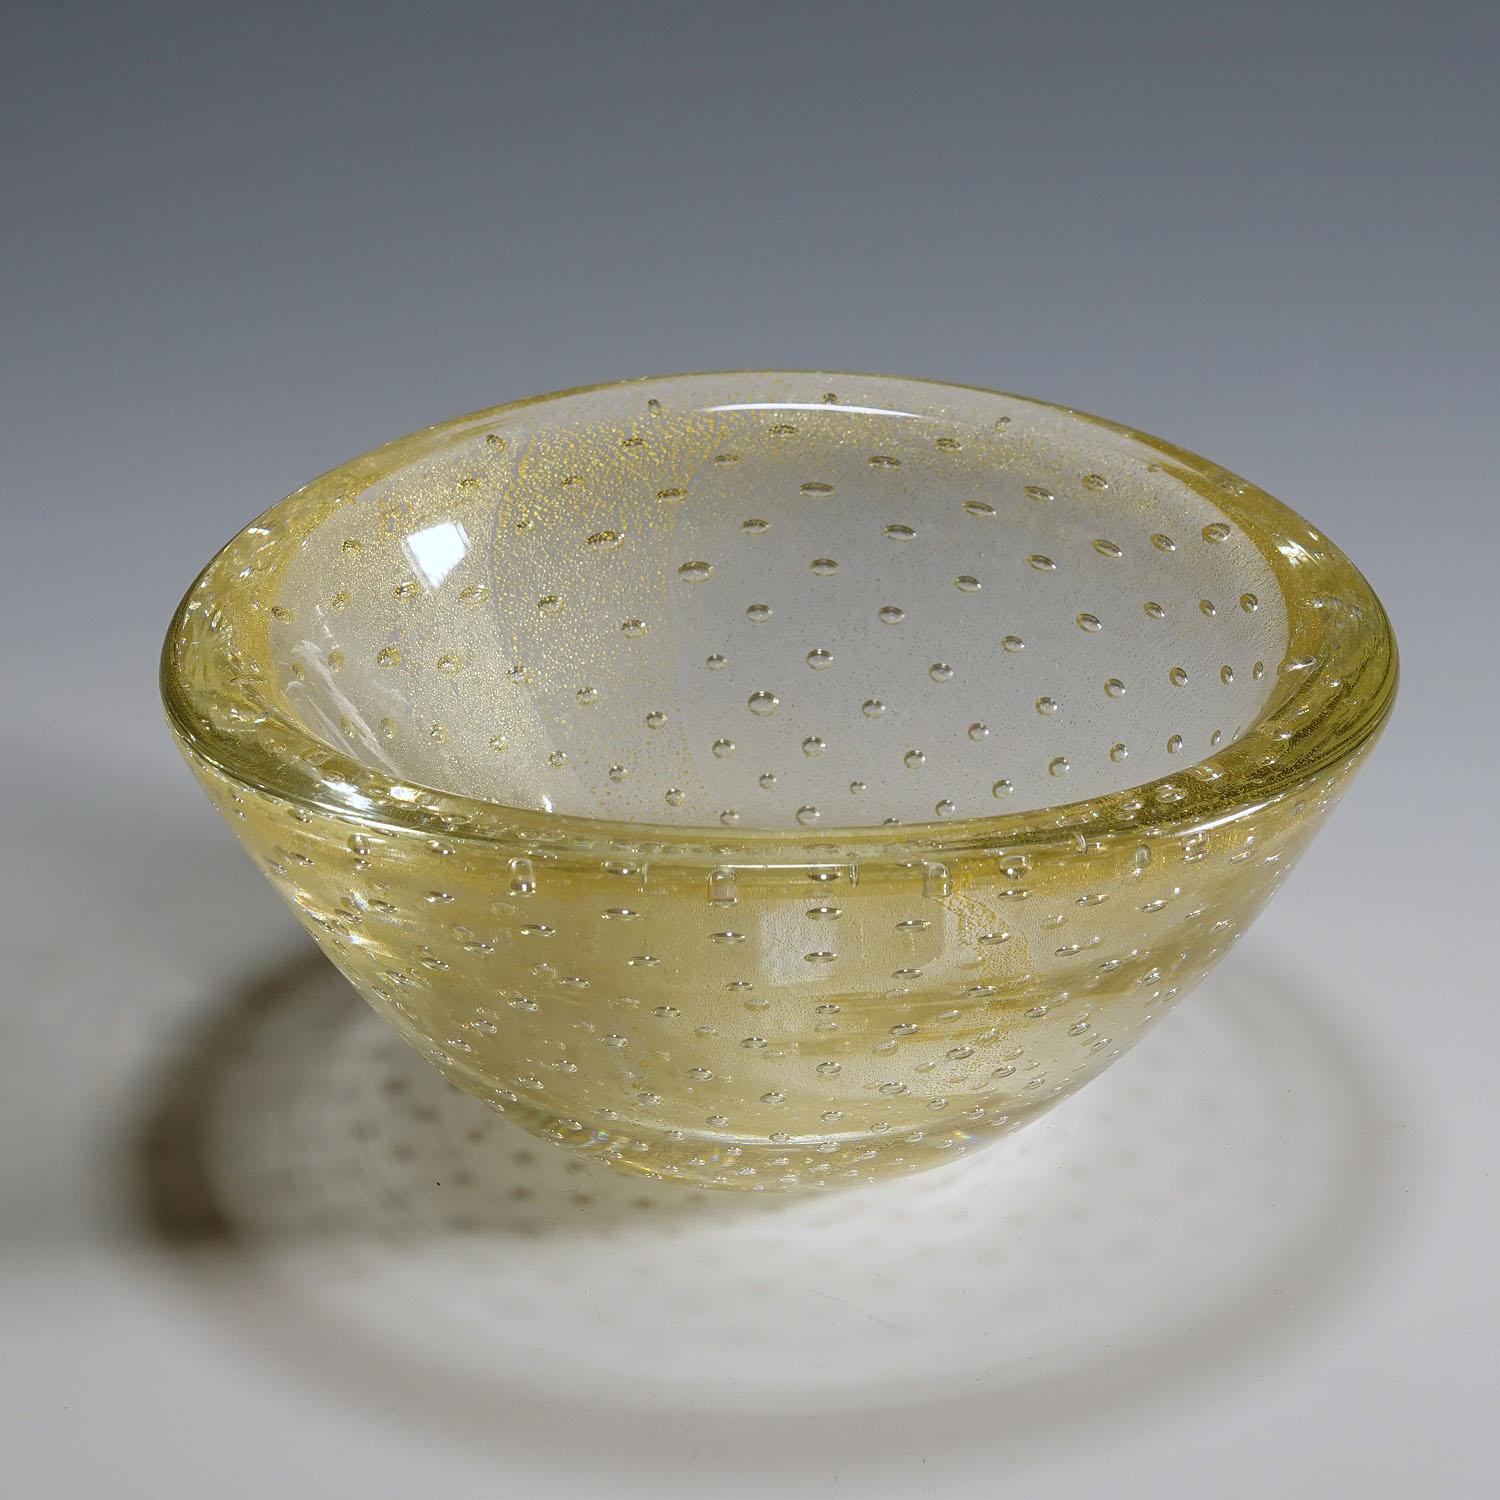 Italian Vintage Art Glass Bowl with Gold Foil by Barovier, Murano Italy, 1950s